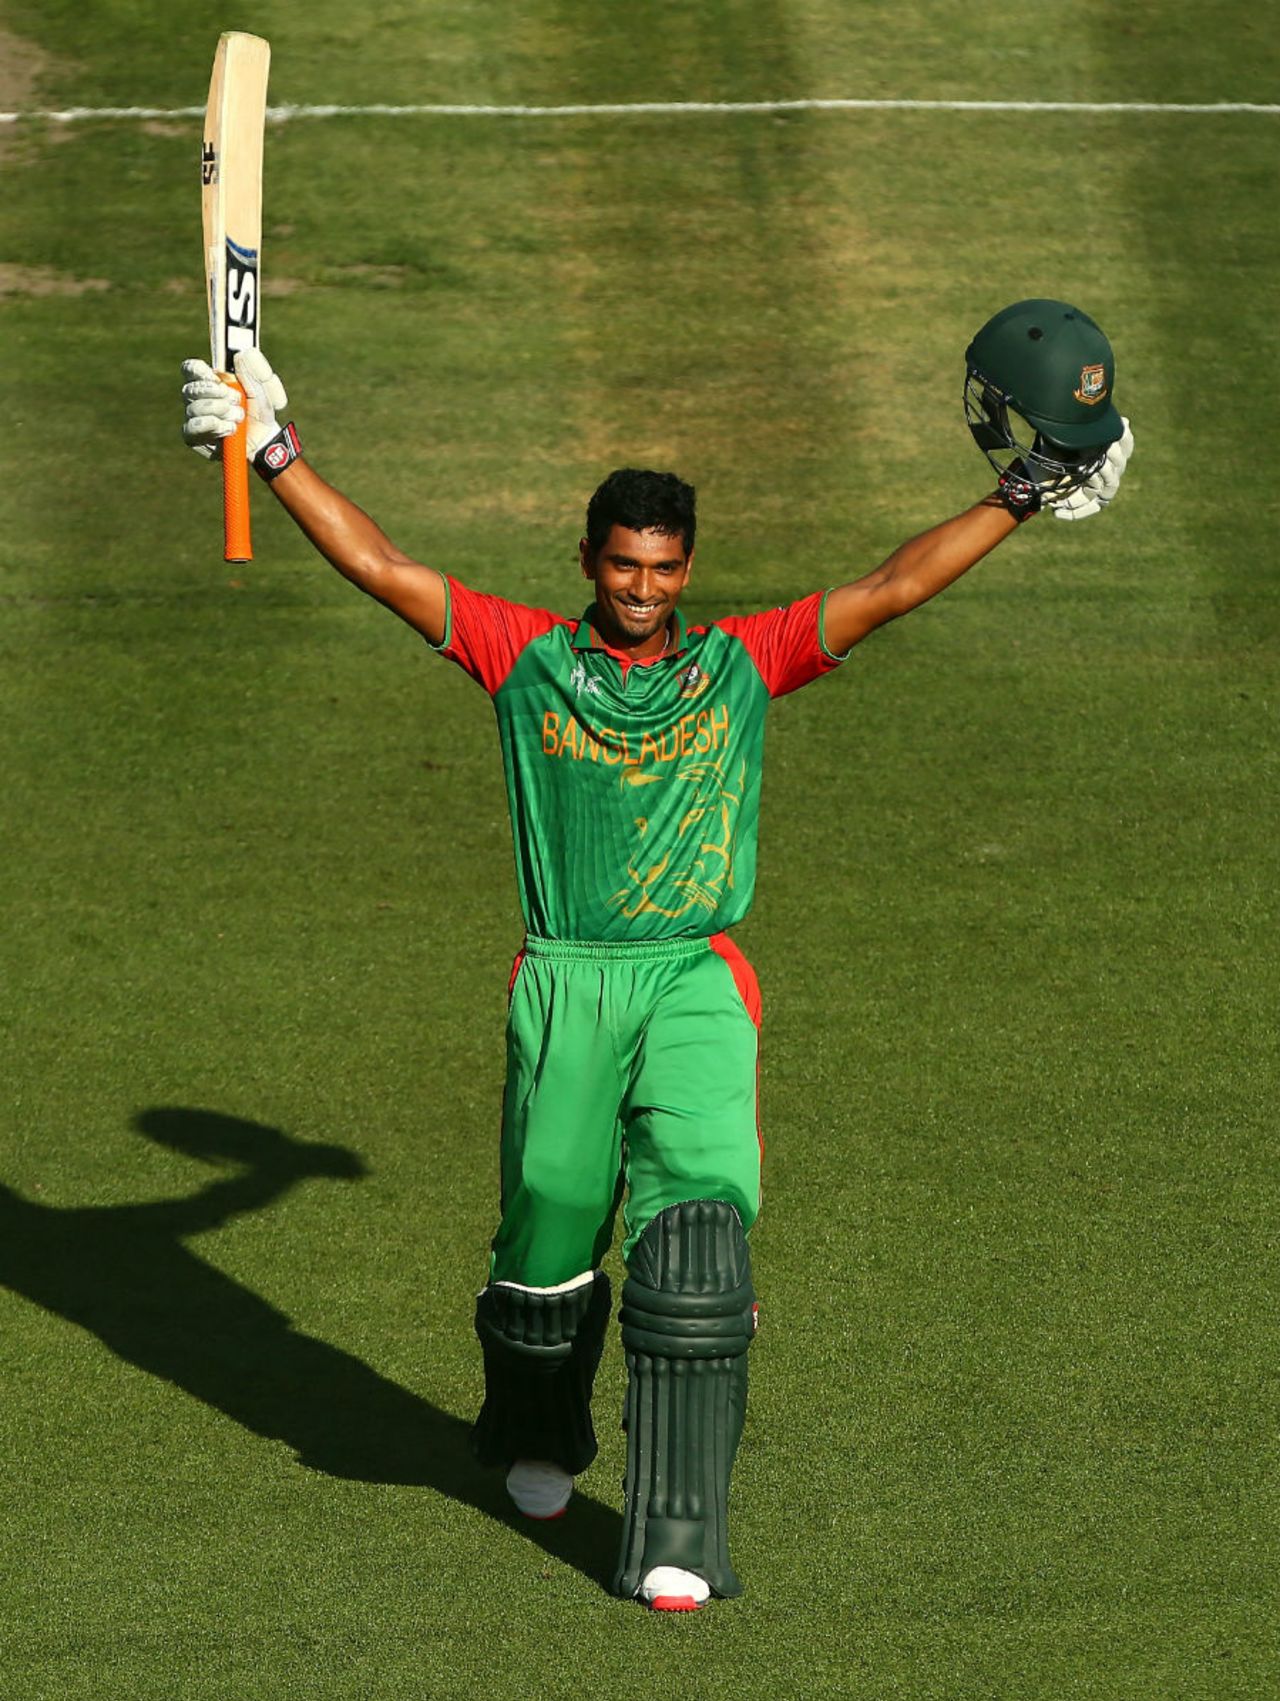 Mahmudullah struck 12 fours and three sixes in his unbeaten 123-ball 128, New Zealand v Bangladesh, World Cup 2015, Group A, Hamilton, March 13, 2015